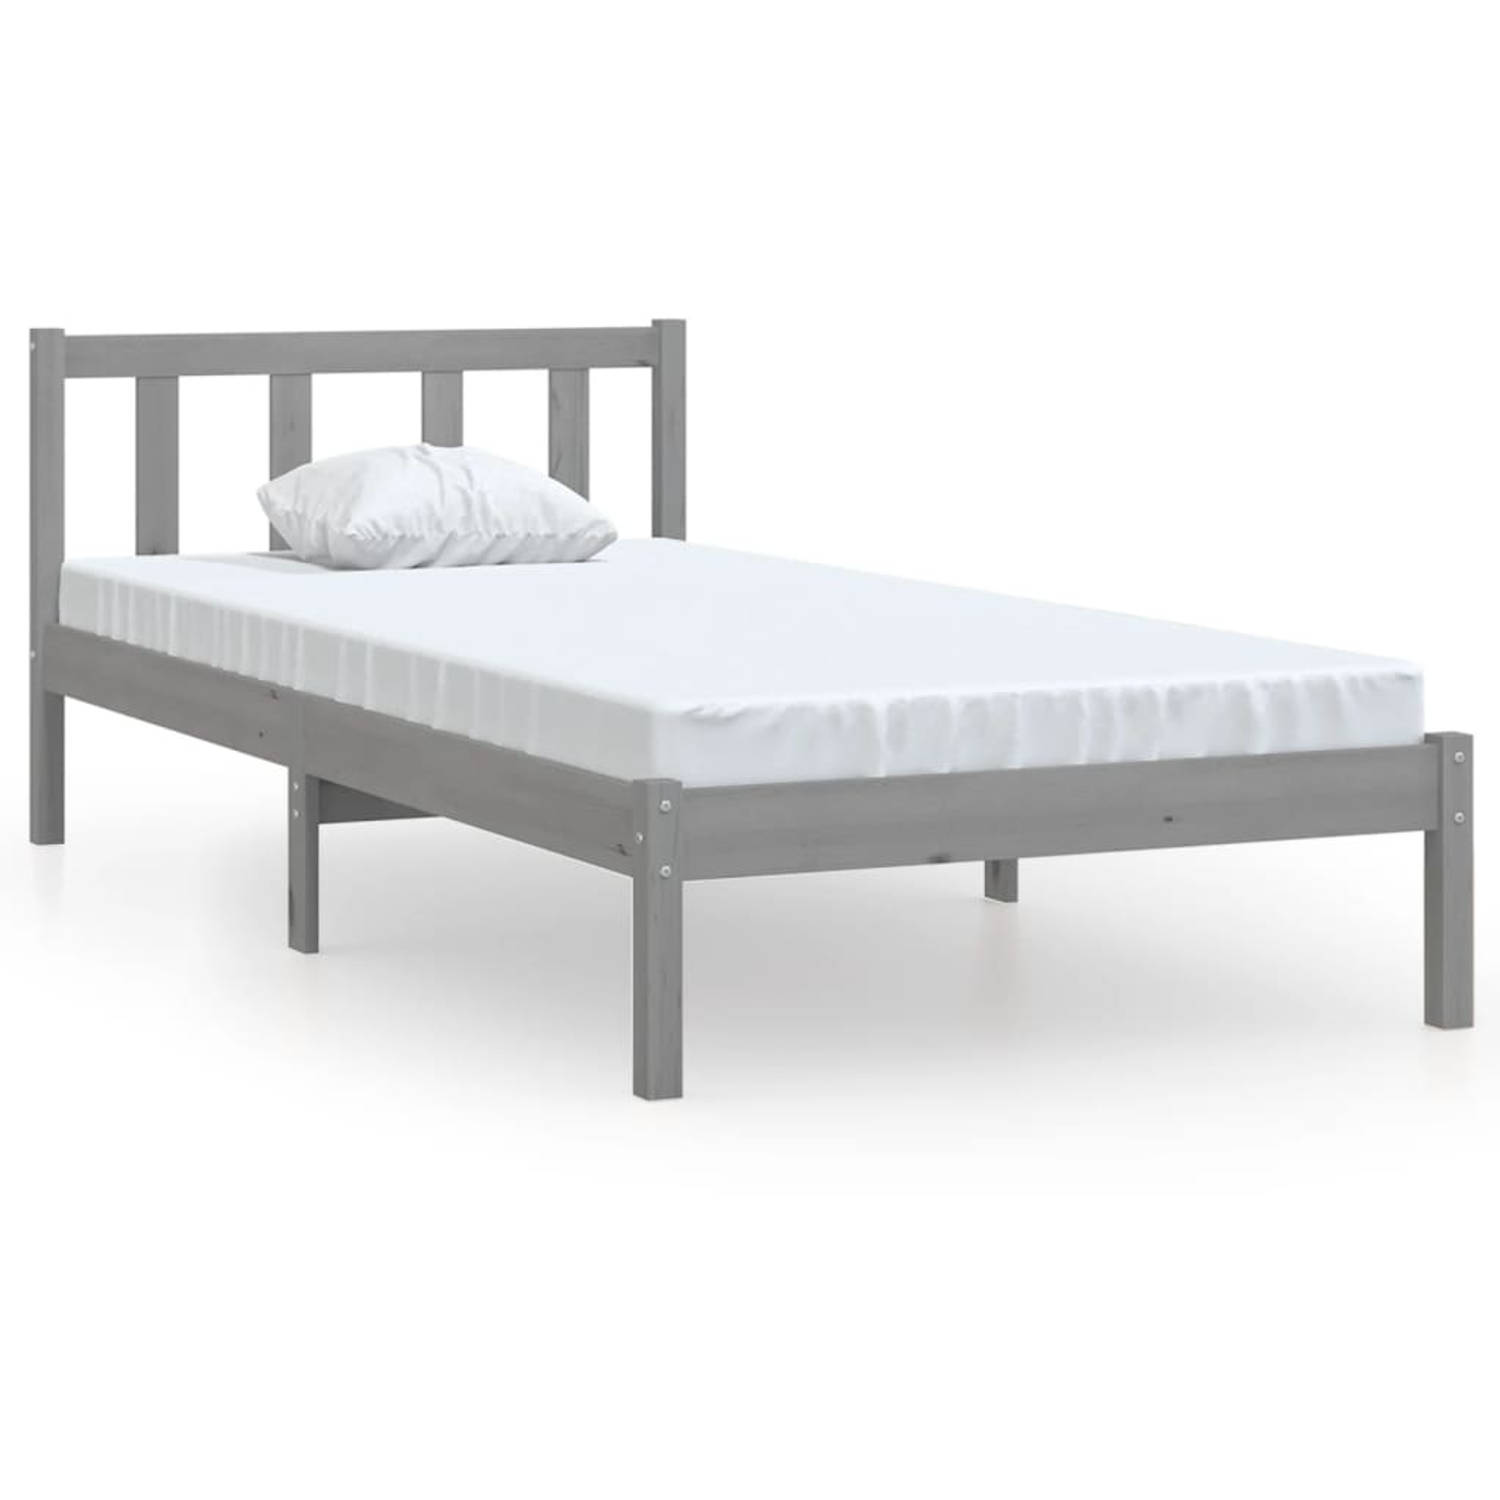 The Living Store Bedframe massief grenenhout grijs 75x190 cm 2FT6 Small Single - Bed